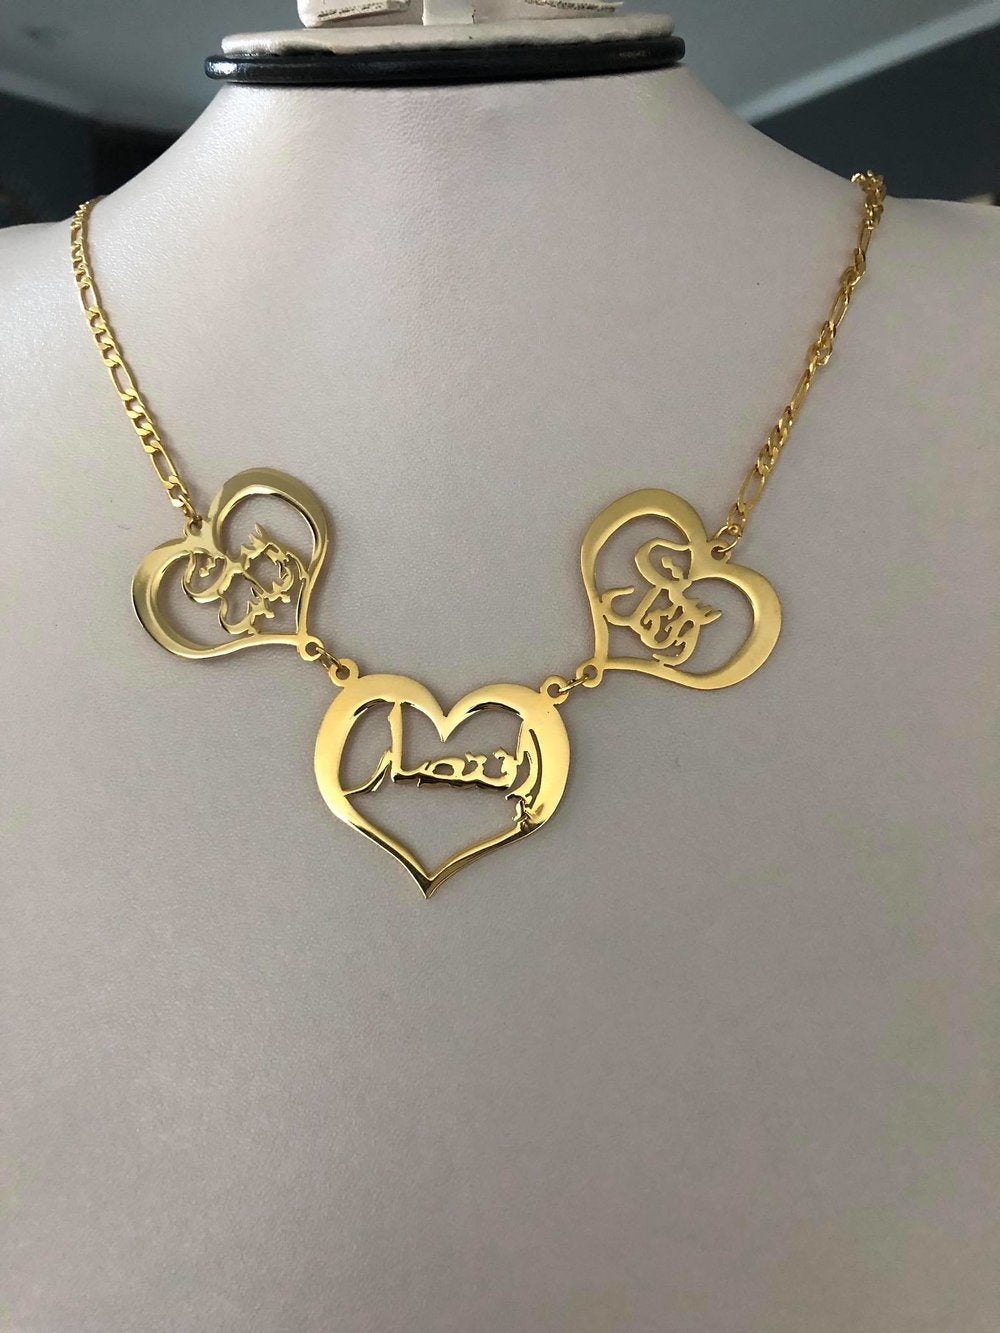 Family Necklace - 3Hearts connected